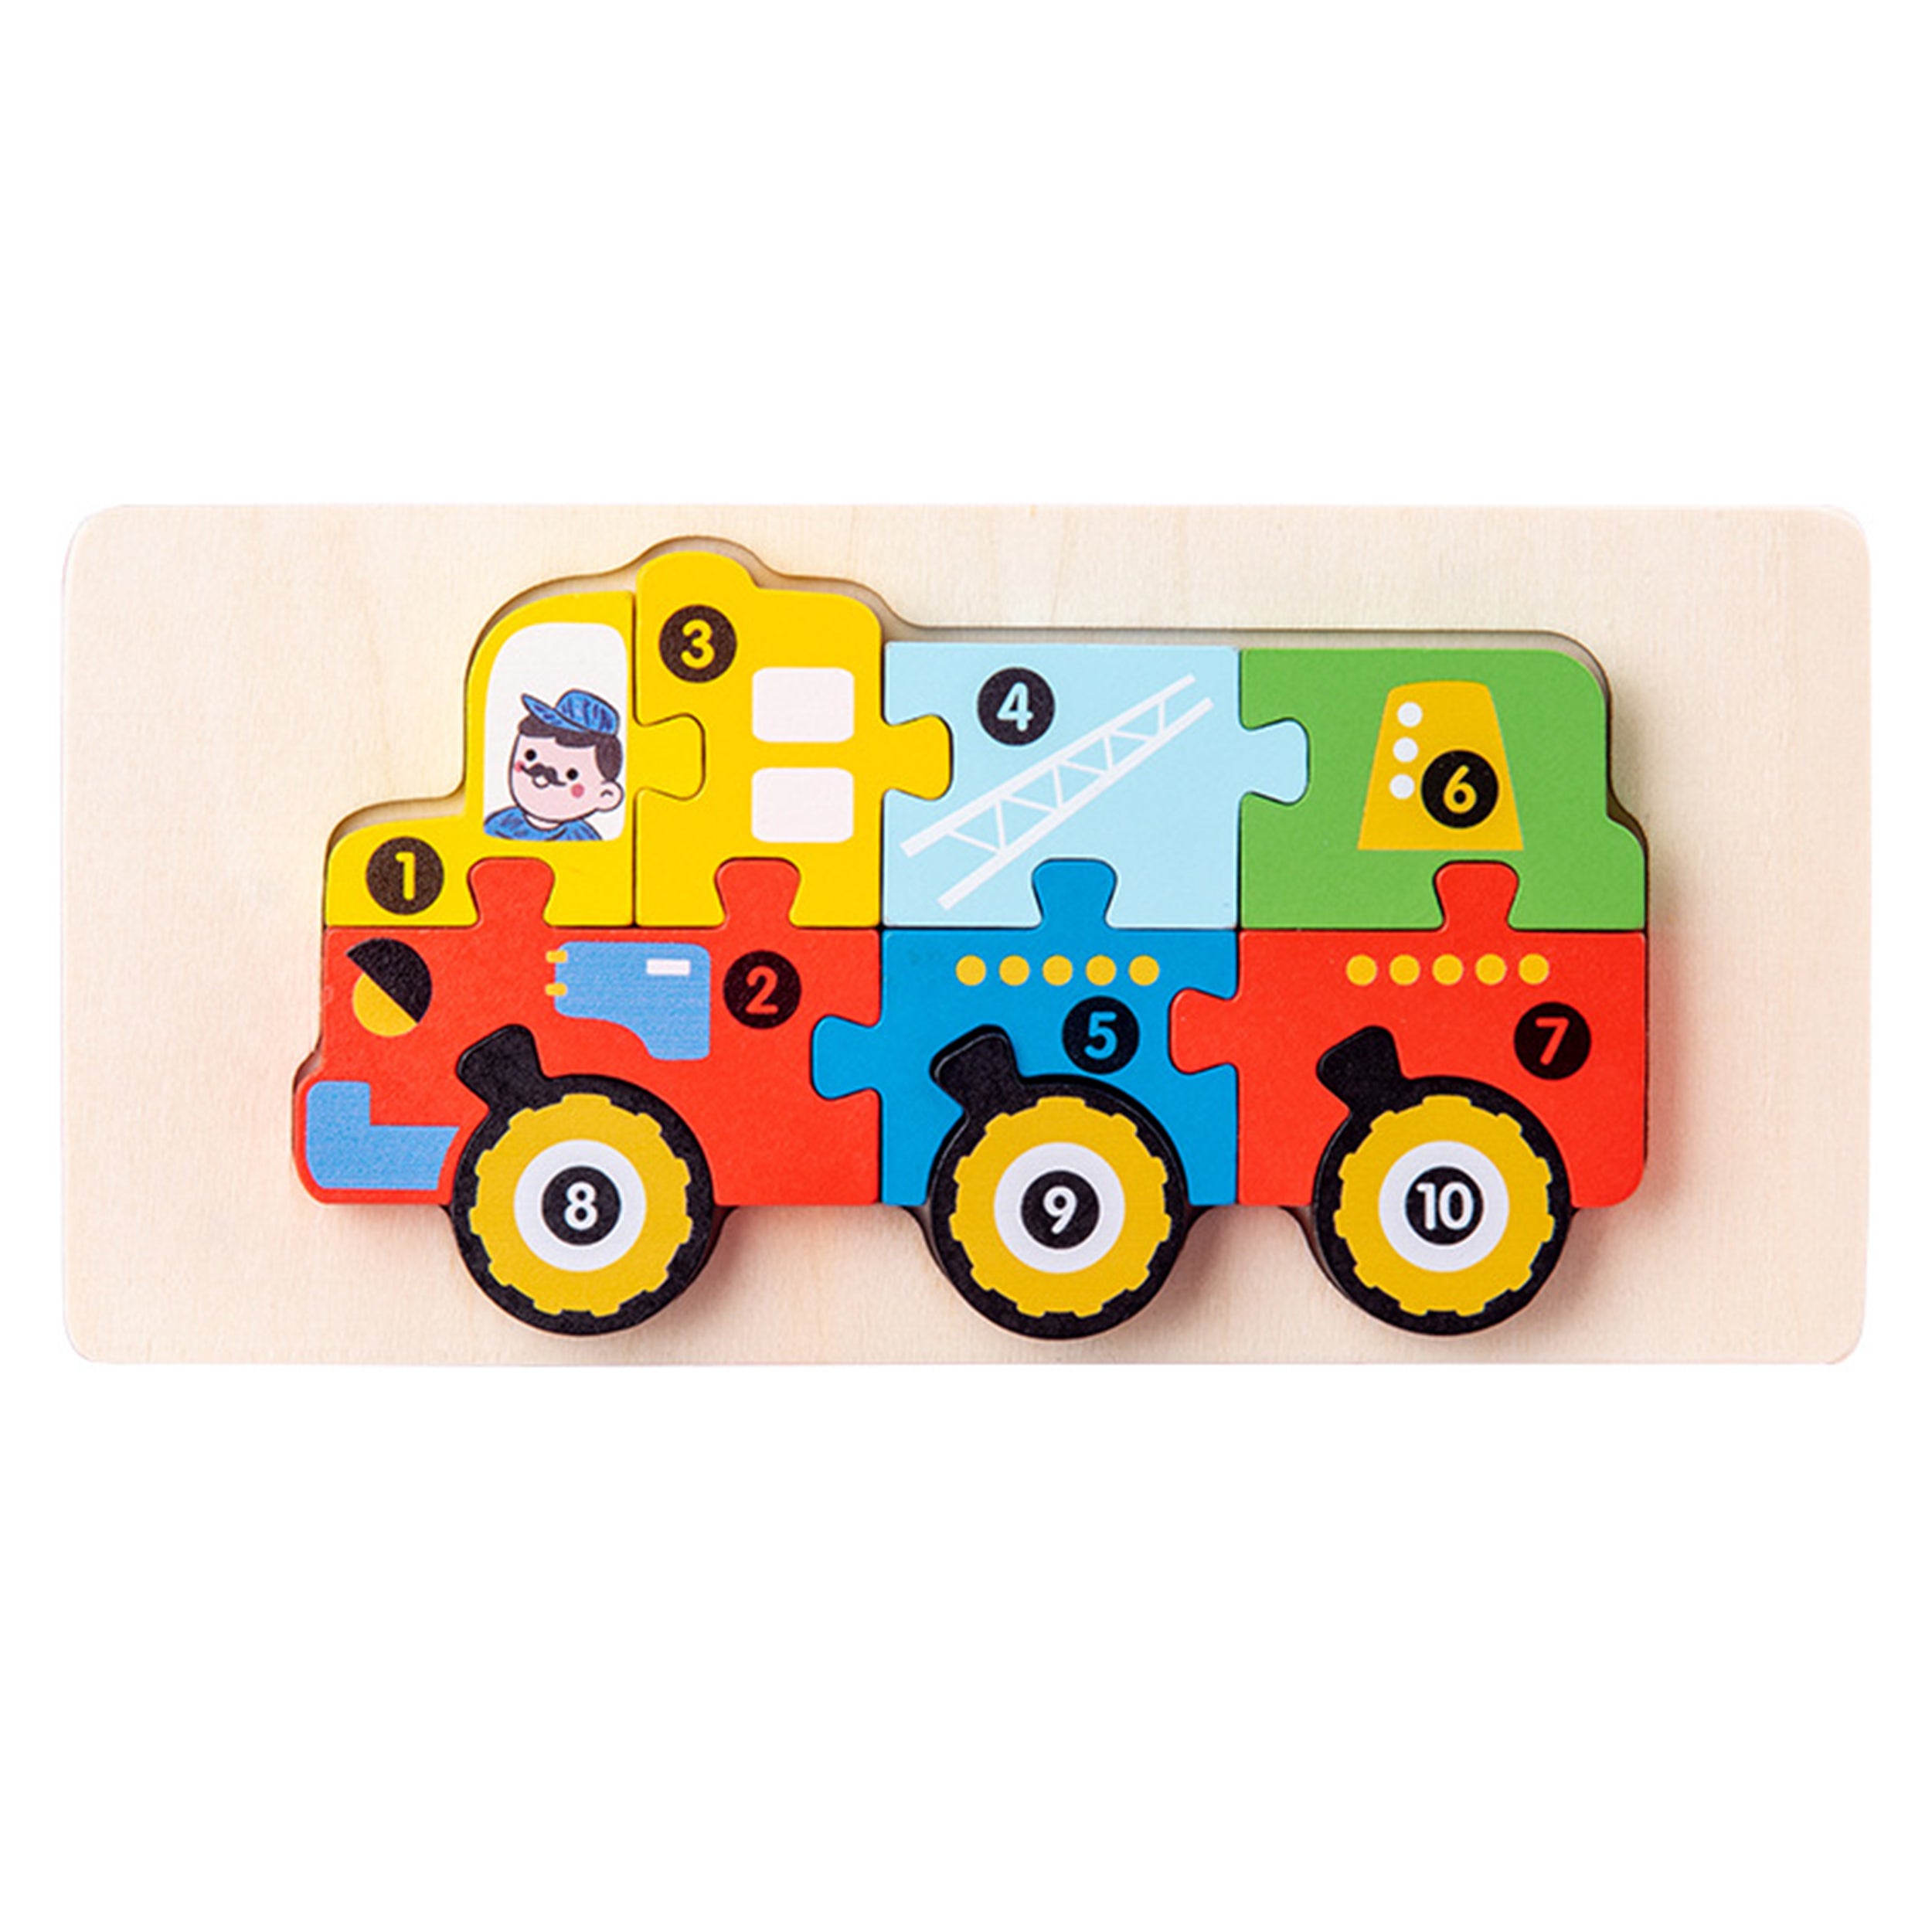 Jigsaw Wood Puzzles Toy For Kids - Assorted